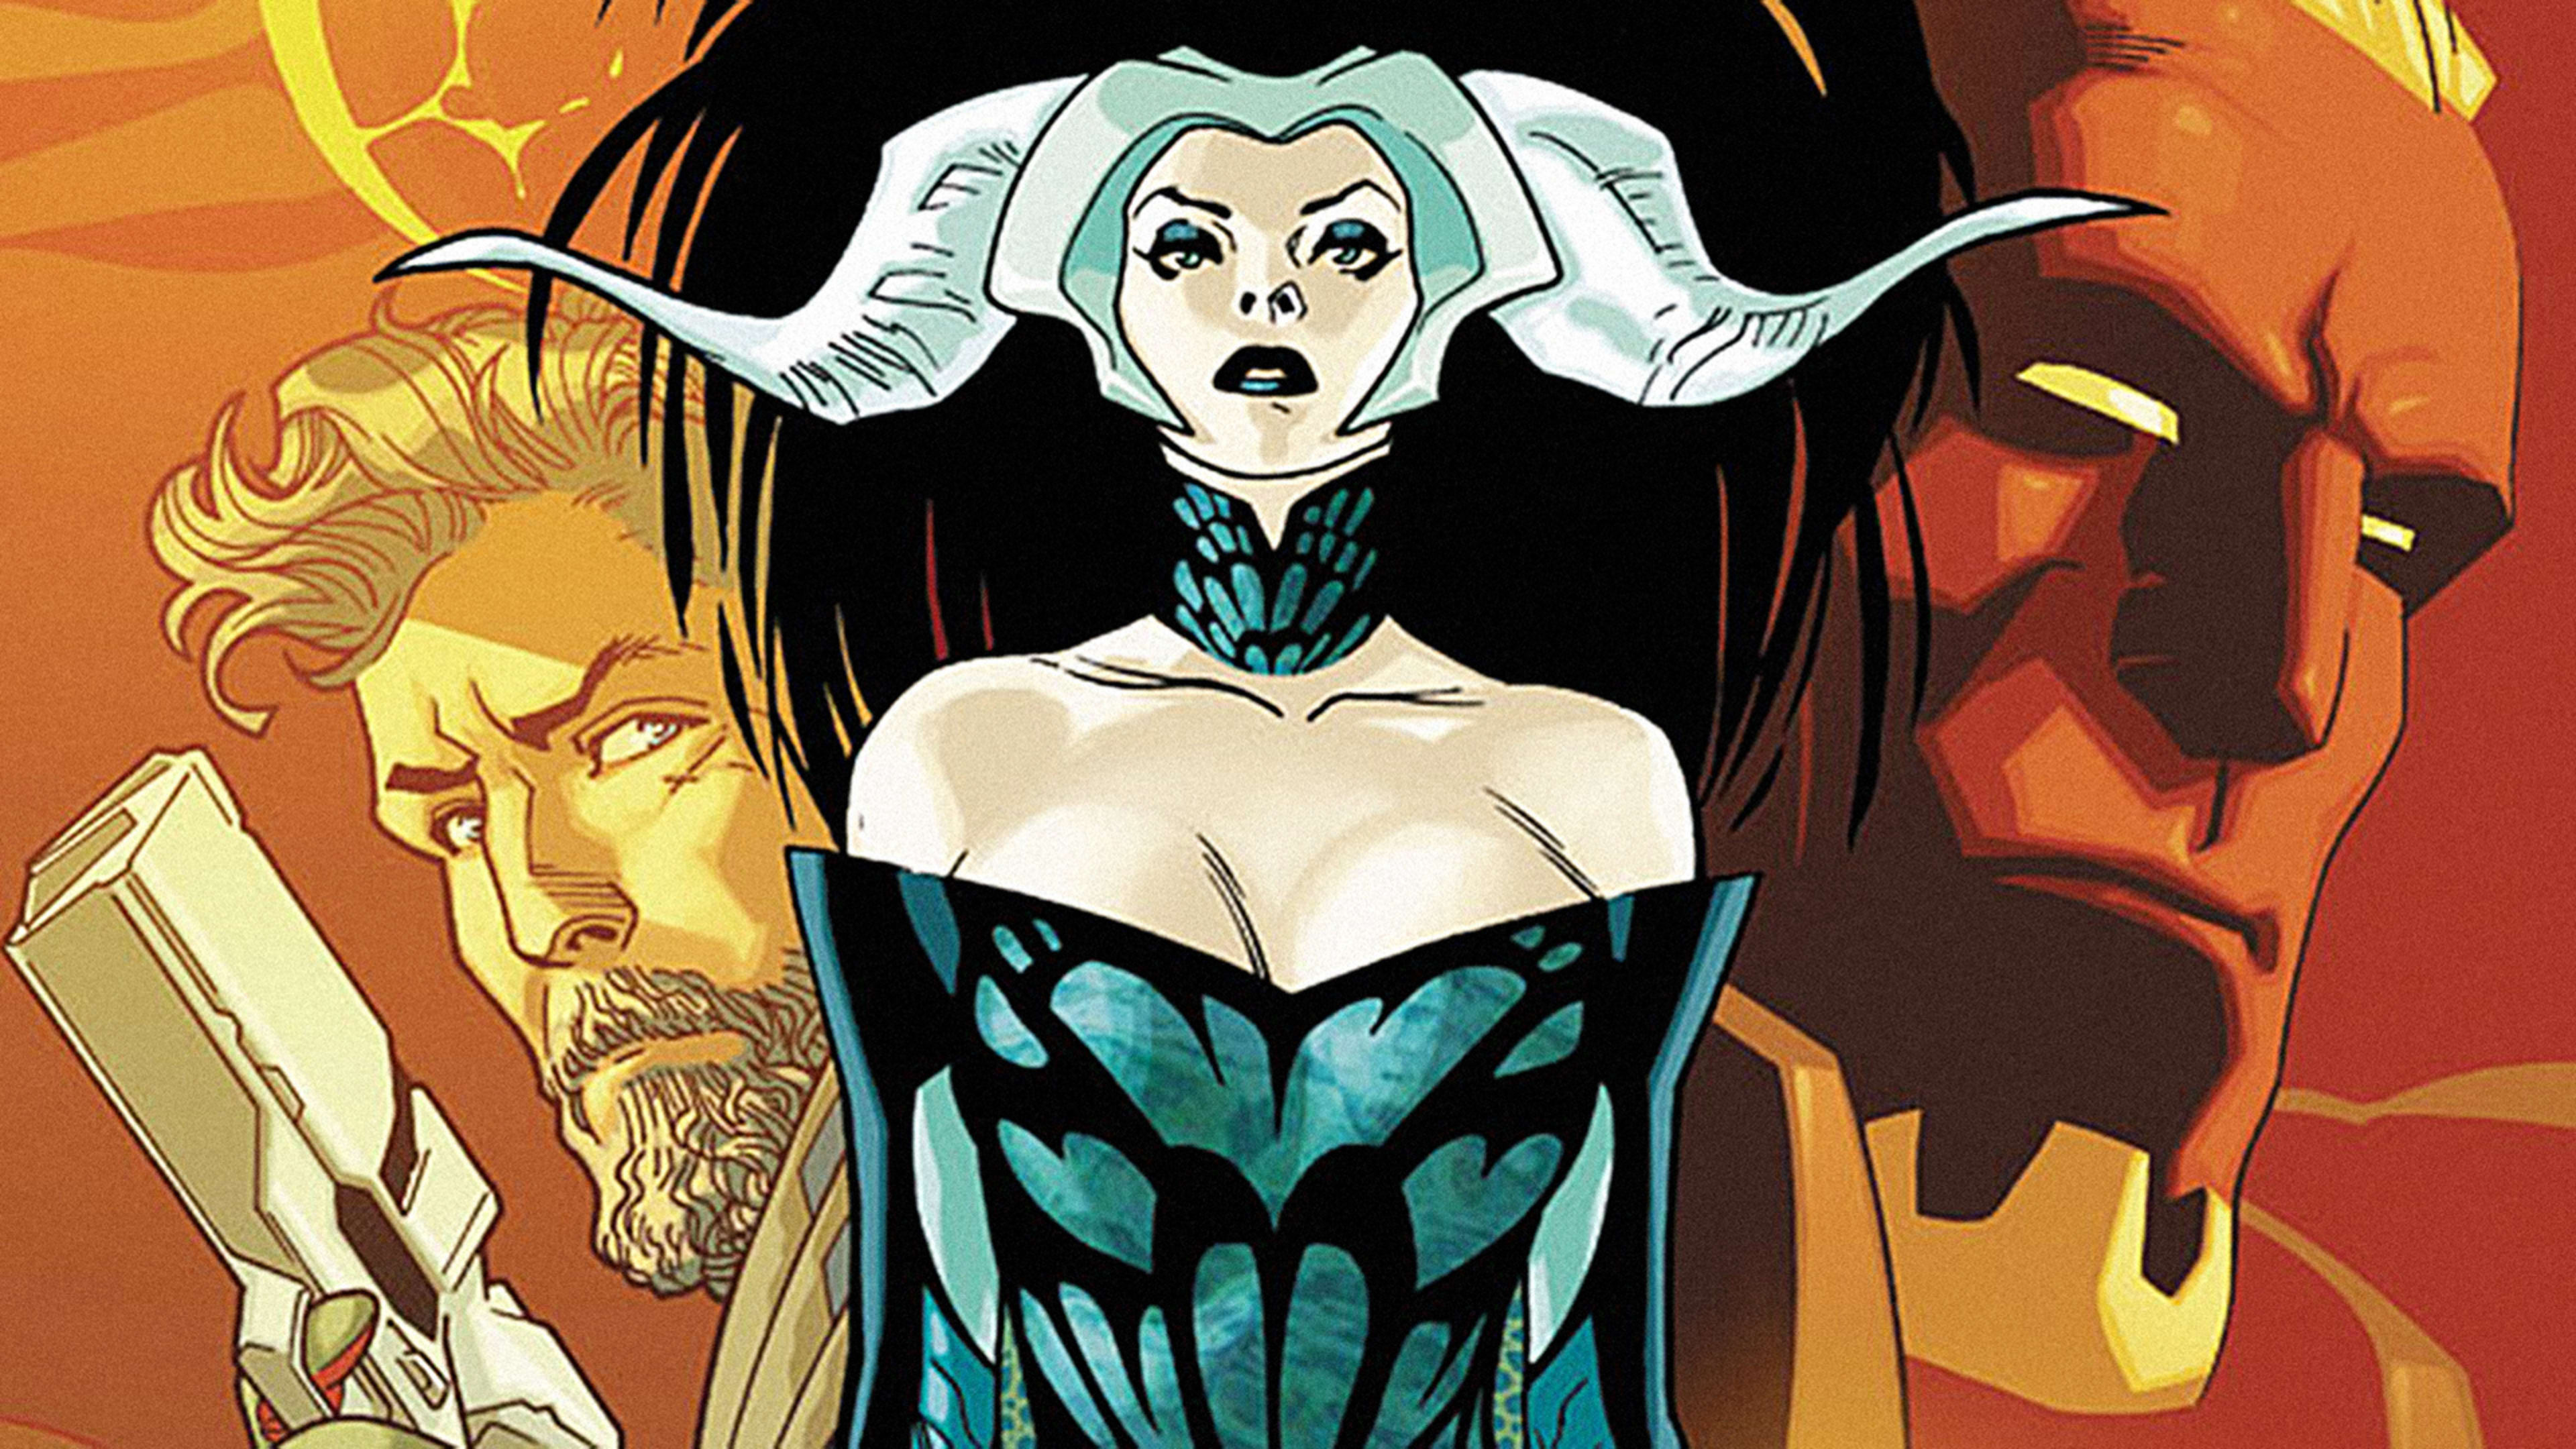 Writer Mark Millar On Going From “Kick-Ass” To Family-Friendly Space Opera “Empress”